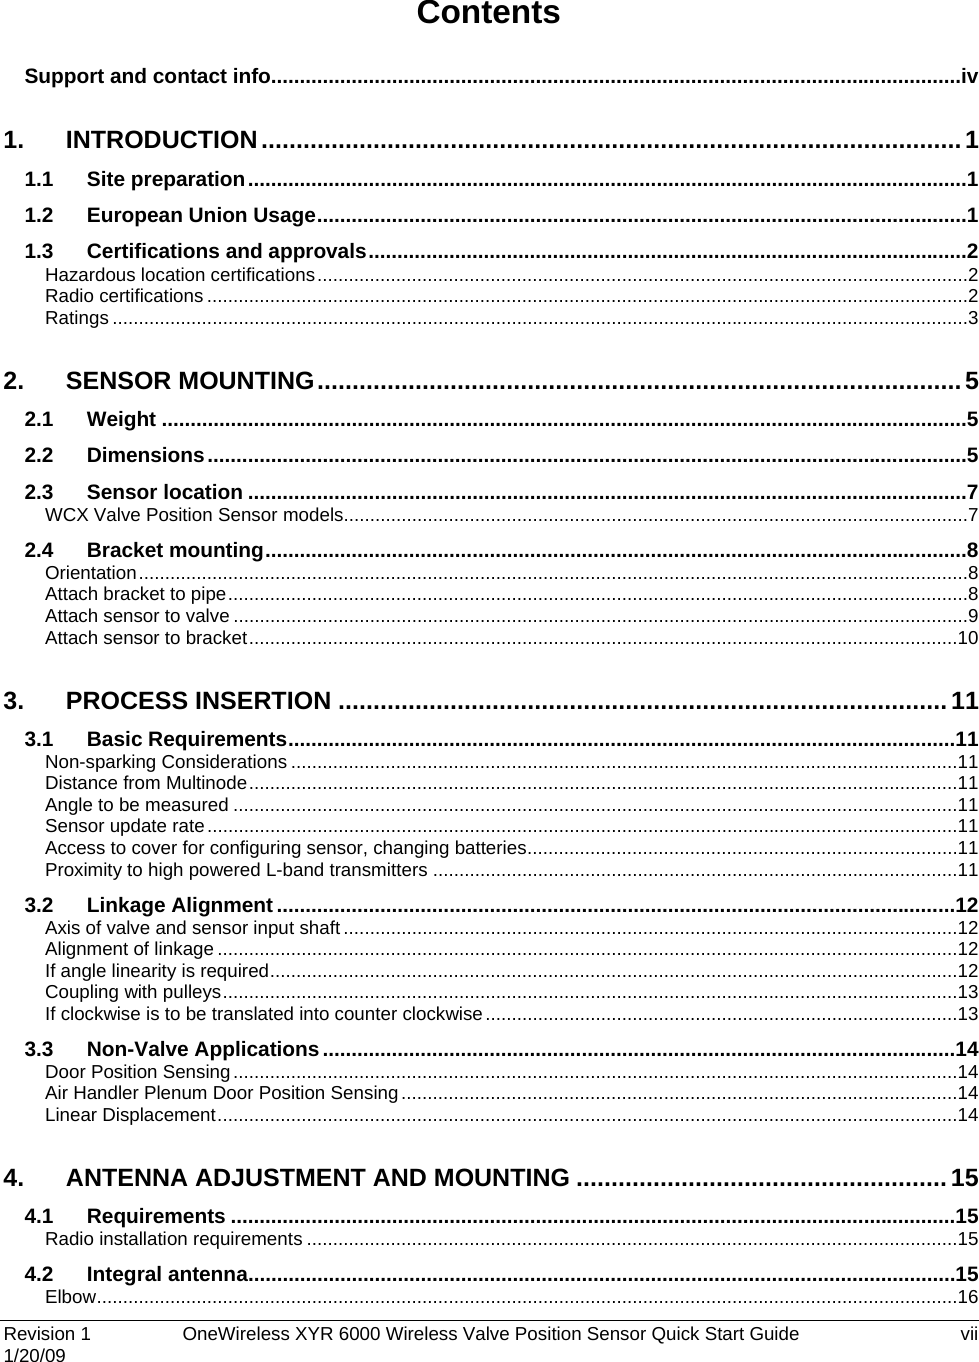  Revision 1   OneWireless XYR 6000 Wireless Valve Position Sensor Quick Start Guide  vii 1/20/09  Contents Support and contact info........................................................................................................................ iv 1. INTRODUCTION .................................................................................................... 1 1.1 Site preparation ............................................................................................................................. 1 1.2 European Union Usage ................................................................................................................. 1 1.3 Certifications and approvals ........................................................................................................ 2 Hazardous location certifications ............................................................................................................................ 2 Radio certifications ................................................................................................................................................. 2 Ratings ................................................................................................................................................................... 3 2. SENSOR MOUNTING ............................................................................................ 5 2.1 Weight ............................................................................................................................................ 5 2.2 Dimensions .................................................................................................................................... 5 2.3 Sensor location ............................................................................................................................. 7 WCX Valve Position Sensor models....................................................................................................................... 7 2.4 Bracket mounting .......................................................................................................................... 8 Orientation .............................................................................................................................................................. 8 Attach bracket to pipe ............................................................................................................................................. 8 Attach sensor to valve ............................................................................................................................................ 9 Attach sensor to bracket ....................................................................................................................................... 10 3. PROCESS INSERTION ....................................................................................... 11 3.1 Basic Requirements .................................................................................................................... 11 Non-sparking Considerations ............................................................................................................................... 11 Distance from Multinode ....................................................................................................................................... 11 Angle to be measured .......................................................................................................................................... 11 Sensor update rate ............................................................................................................................................... 11 Access to cover for configuring sensor, changing batteries .................................................................................. 11 Proximity to high powered L-band transmitters .................................................................................................... 11 3.2 Linkage Alignment ...................................................................................................................... 12 Axis of valve and sensor input shaft ..................................................................................................................... 12 Alignment of linkage ............................................................................................................................................. 12 If angle linearity is required ................................................................................................................................... 12 Coupling with pulleys ............................................................................................................................................ 13 If clockwise is to be translated into counter clockwise .......................................................................................... 13 3.3 Non-Valve Applications .............................................................................................................. 14 Door Position Sensing .......................................................................................................................................... 14 Air Handler Plenum Door Position Sensing .......................................................................................................... 14 Linear Displacement ............................................................................................................................................. 14 4. ANTENNA ADJUSTMENT AND MOUNTING ..................................................... 15 4.1 Requirements .............................................................................................................................. 15 Radio installation requirements ............................................................................................................................ 15 4.2 Integral antenna ........................................................................................................................... 15 Elbow .................................................................................................................................................................... 16 